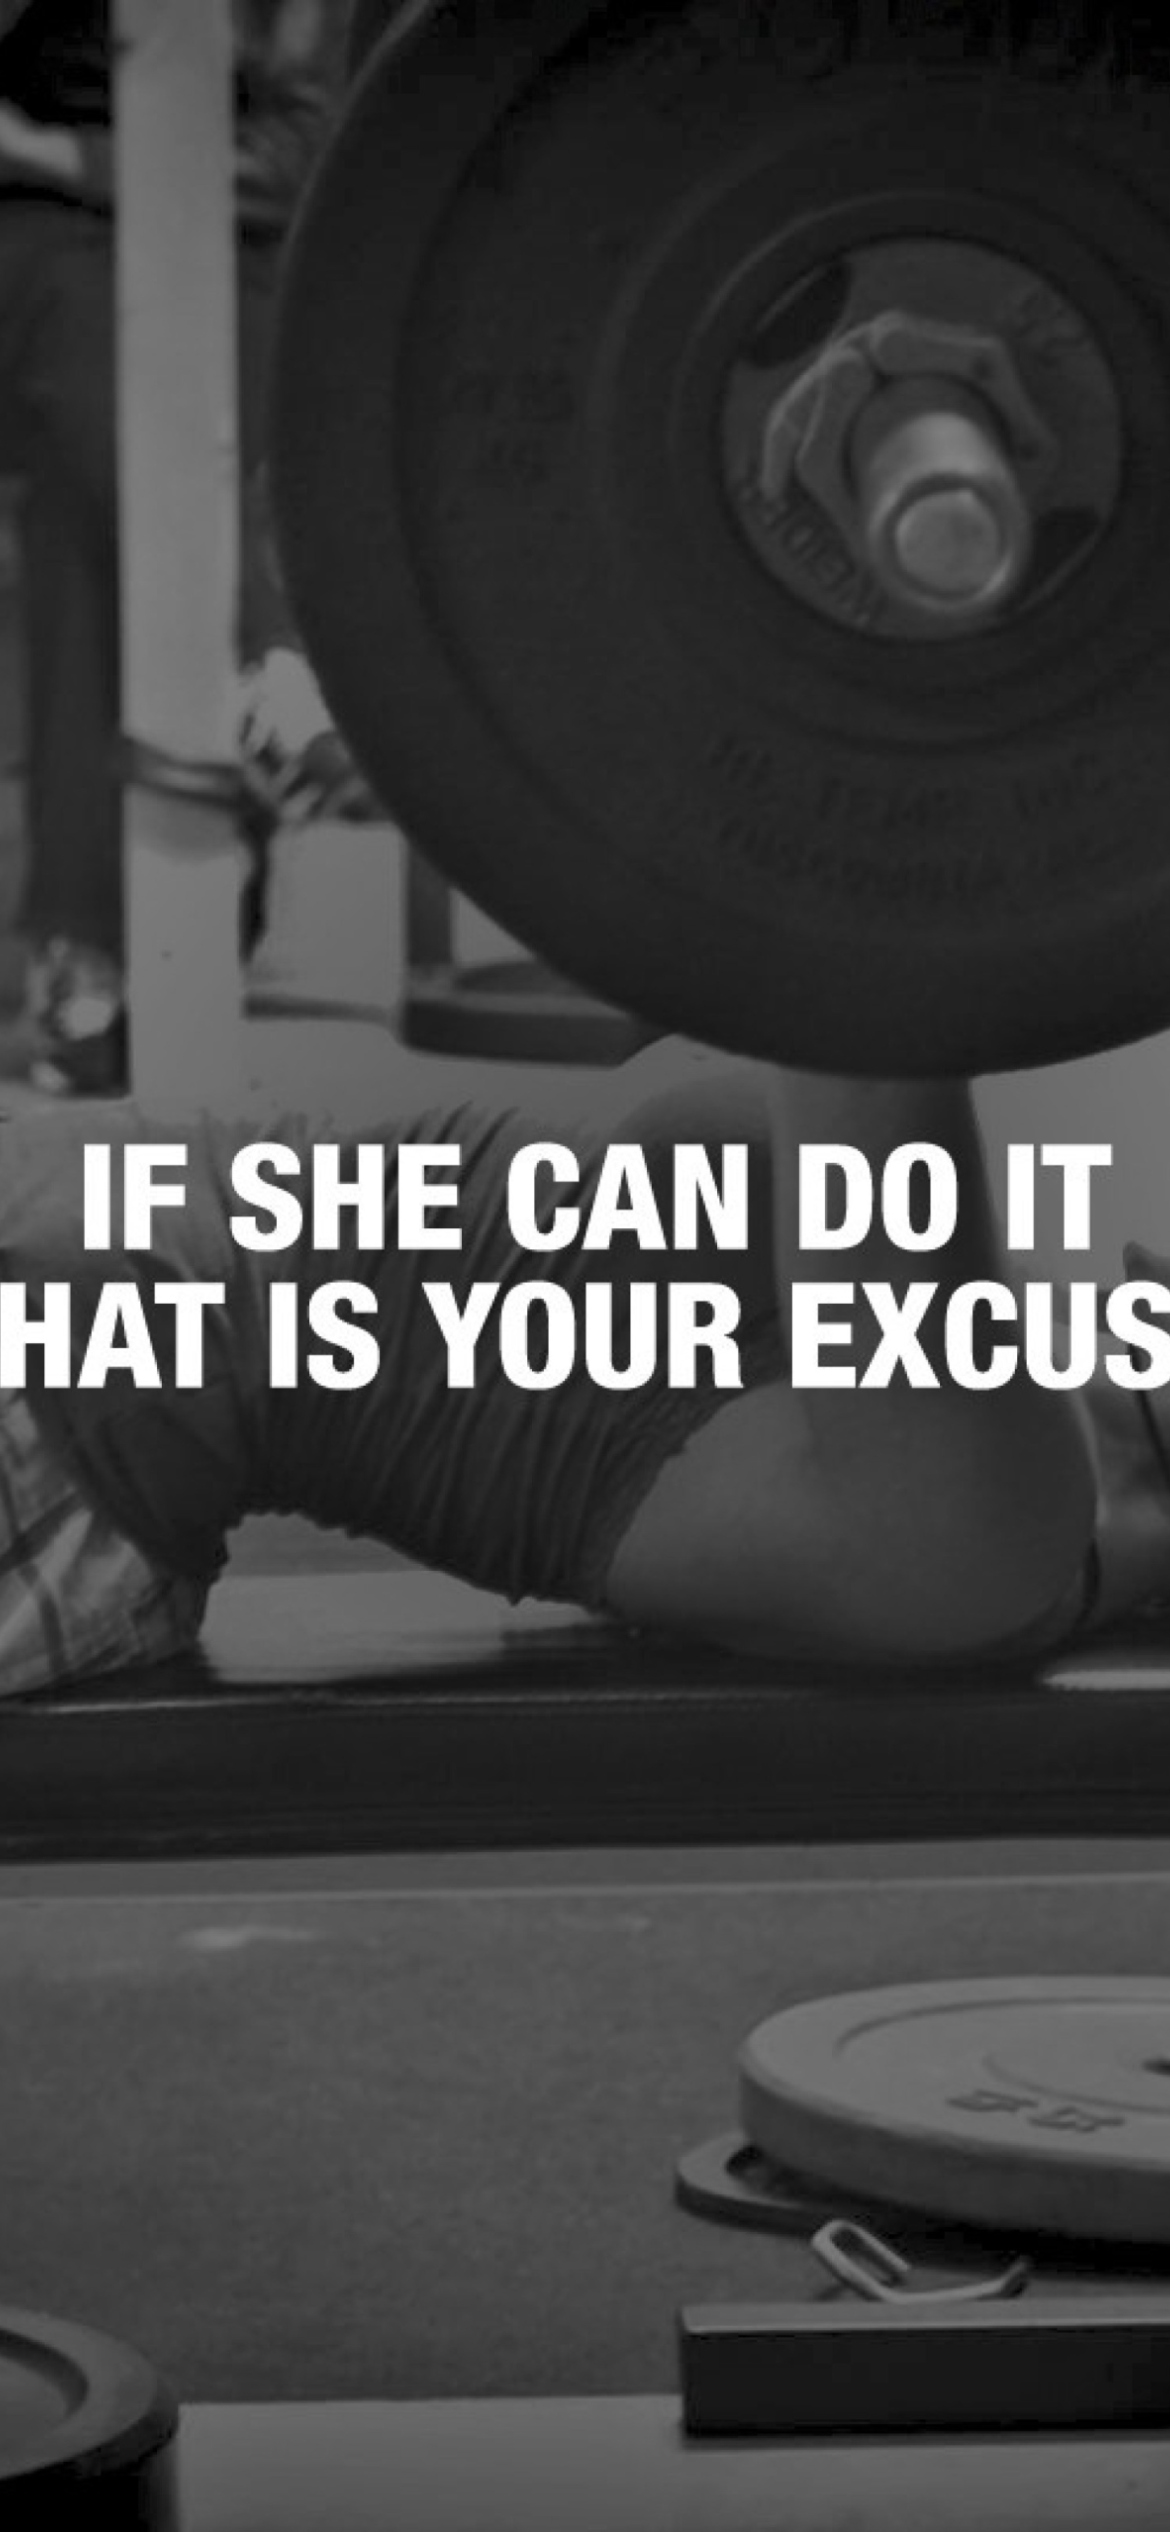 If She Can Do It What Is Your Excuse? screenshot #1 1170x2532